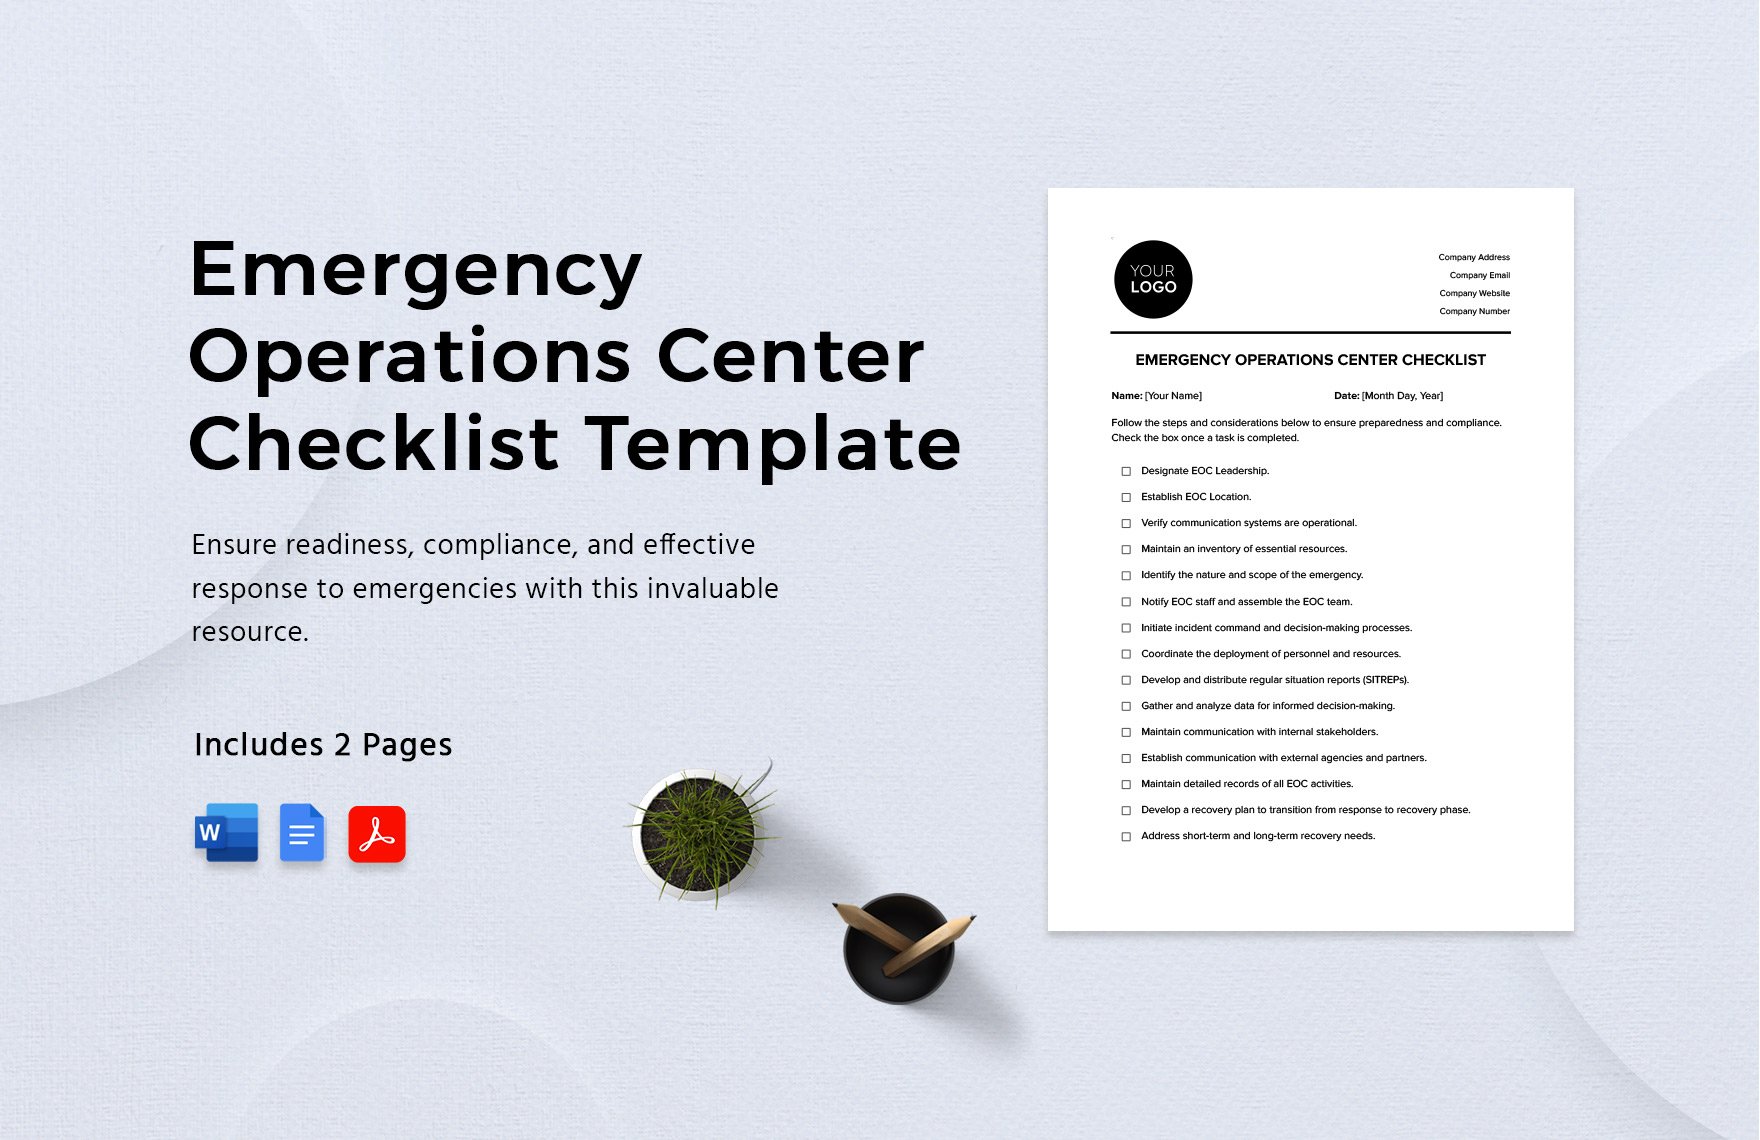 Emergency Operations Center Checklist Template in Word, Google Docs, PDF